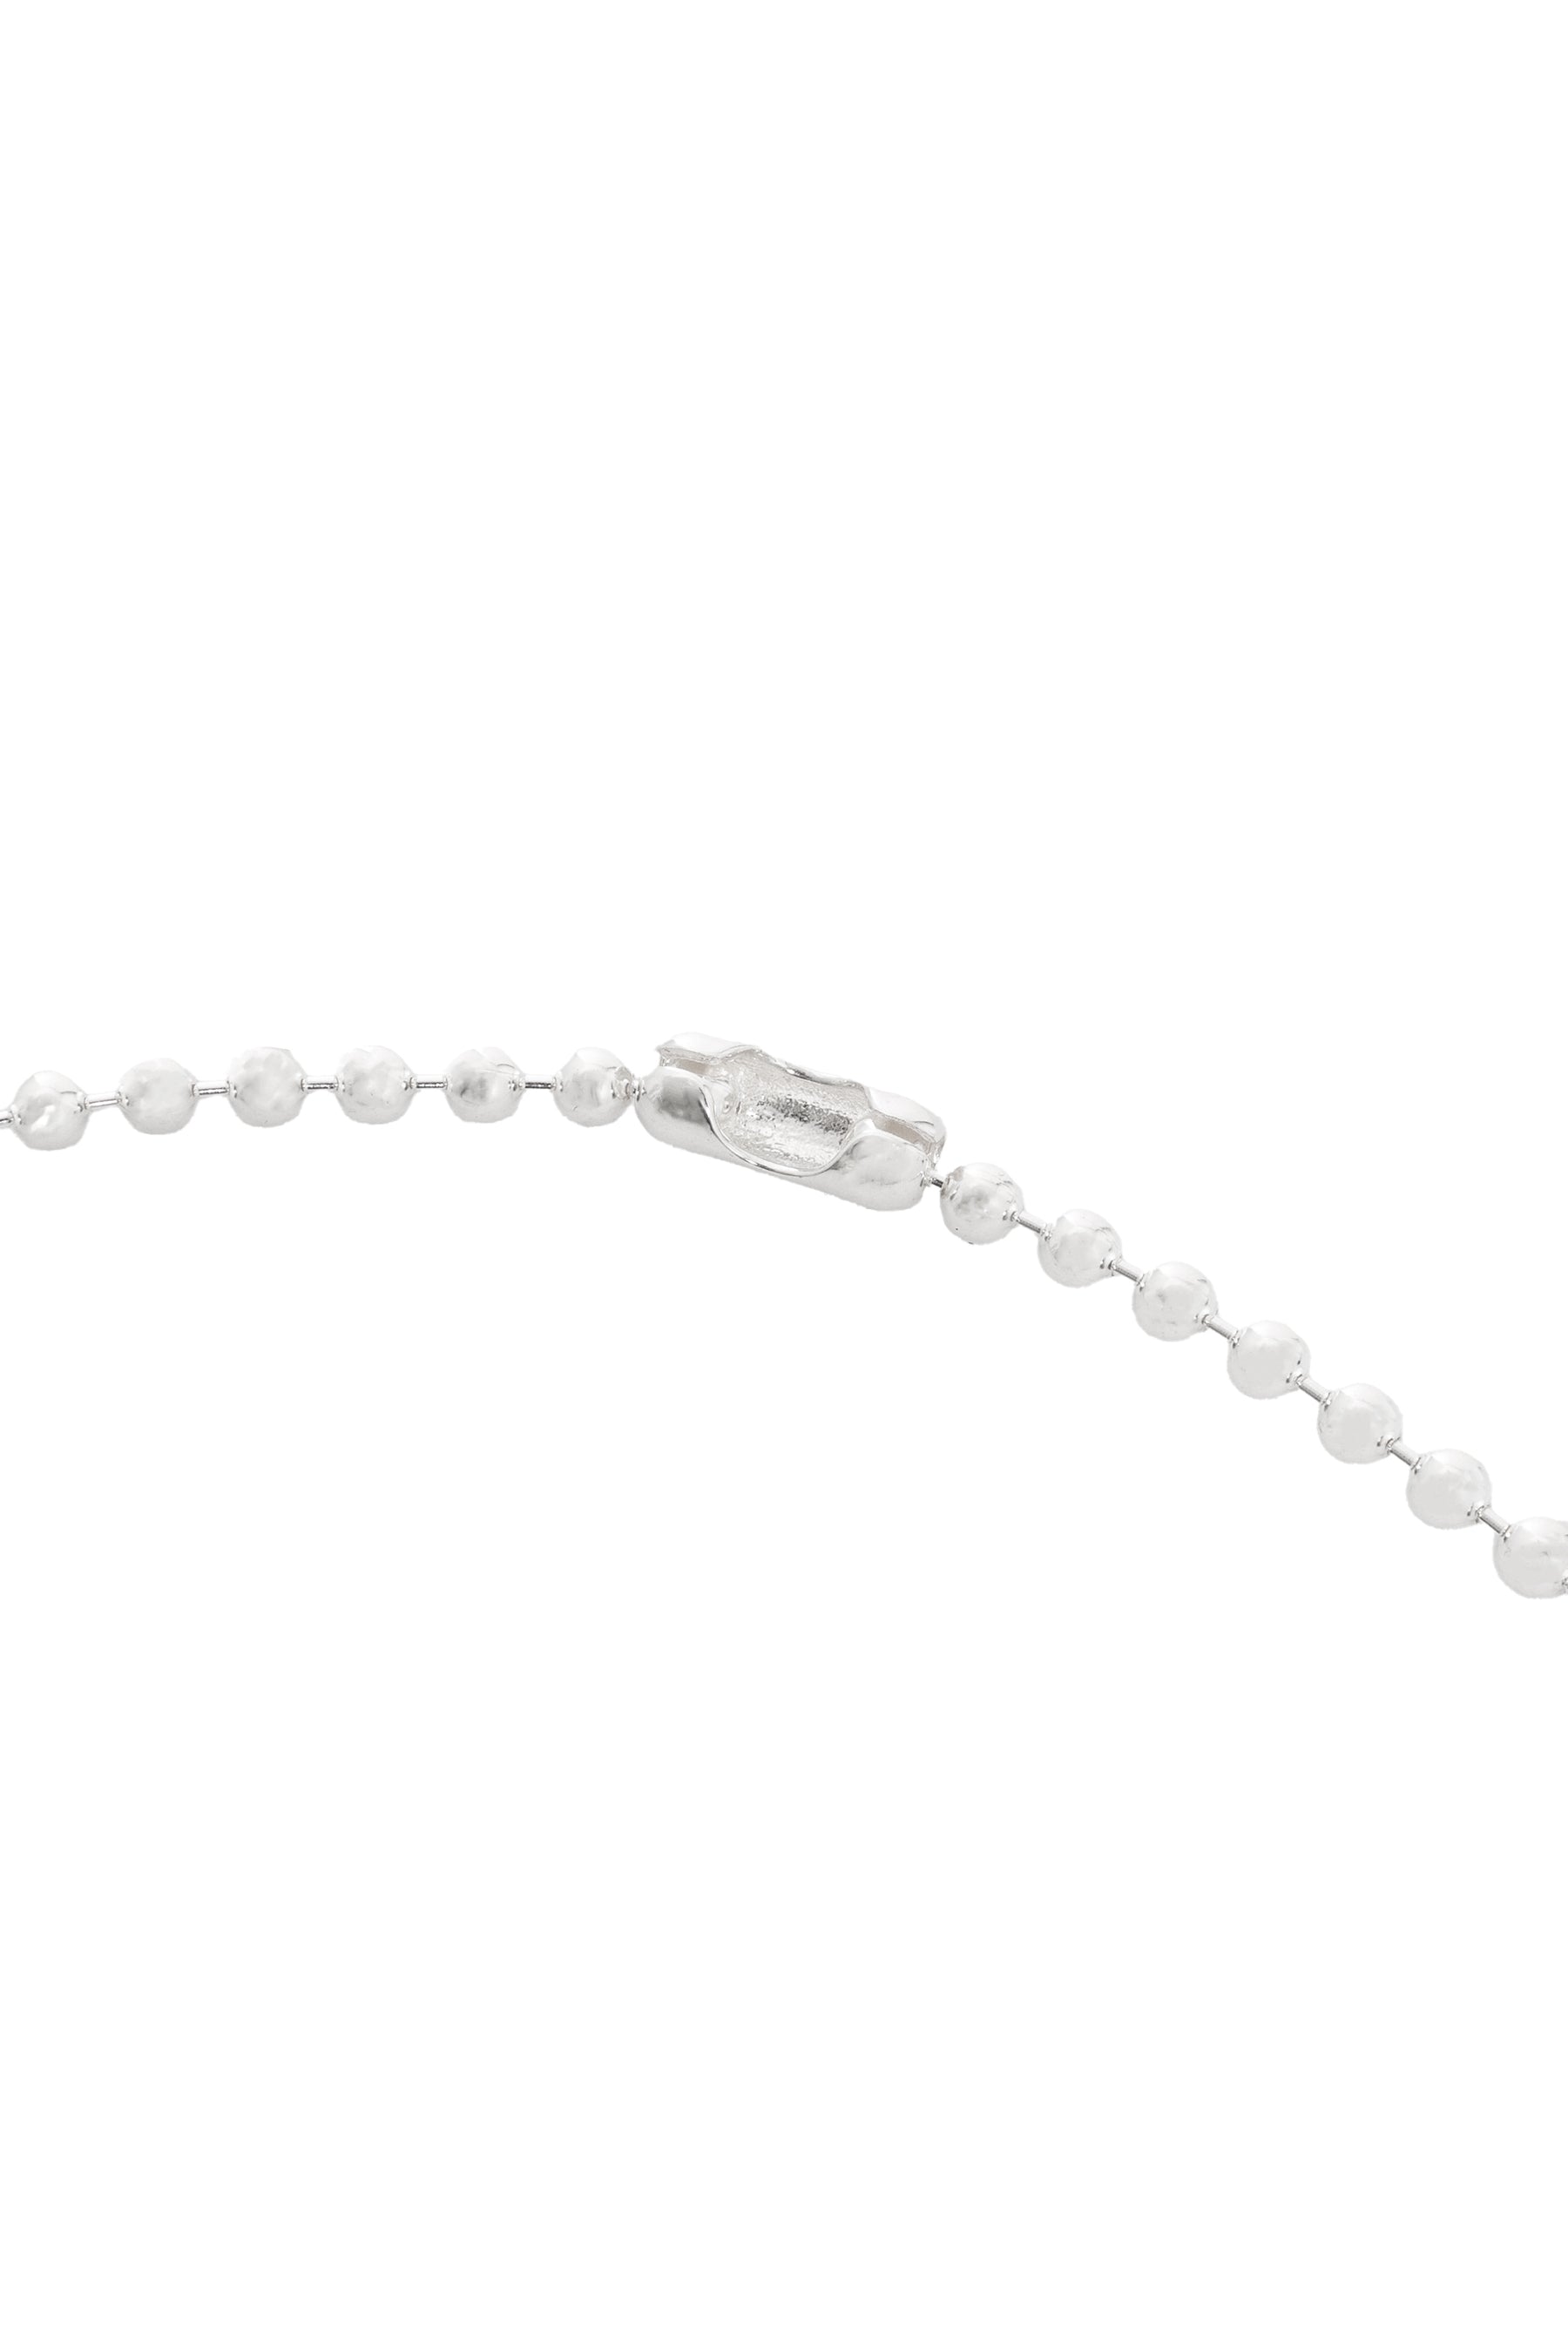 BALL CHAIN NECKLACE. -L- REGULAR / SIL